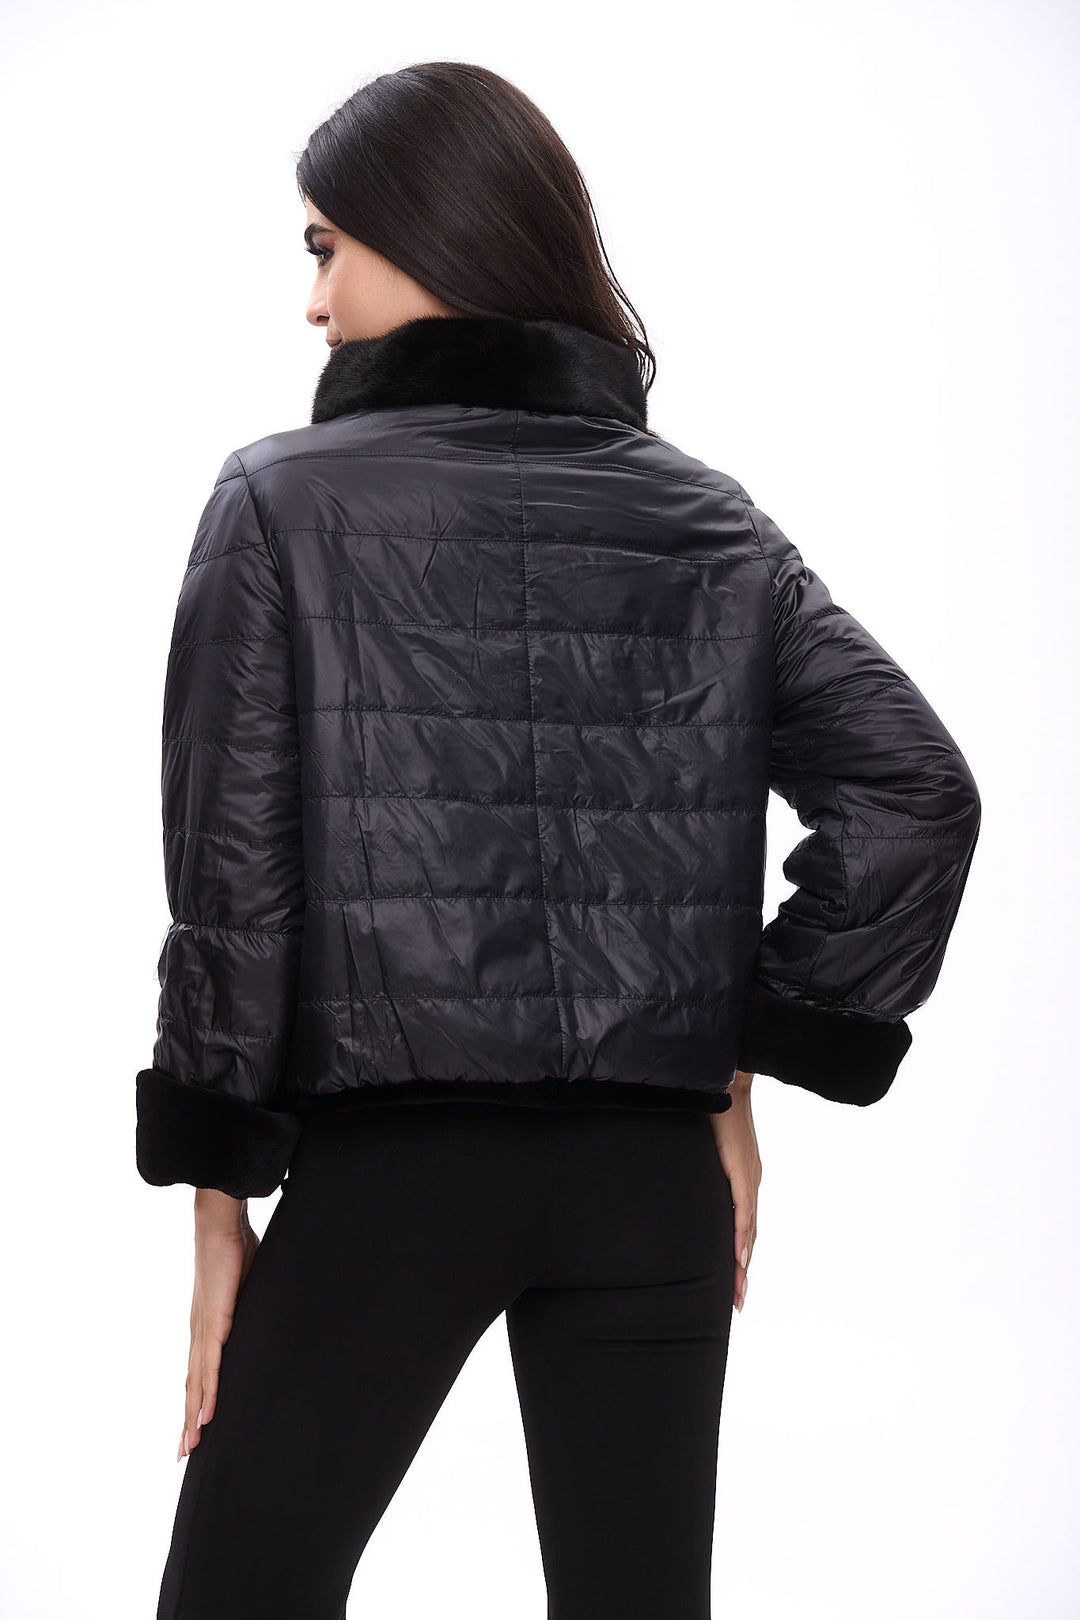 Reversible jacket with stand up collar